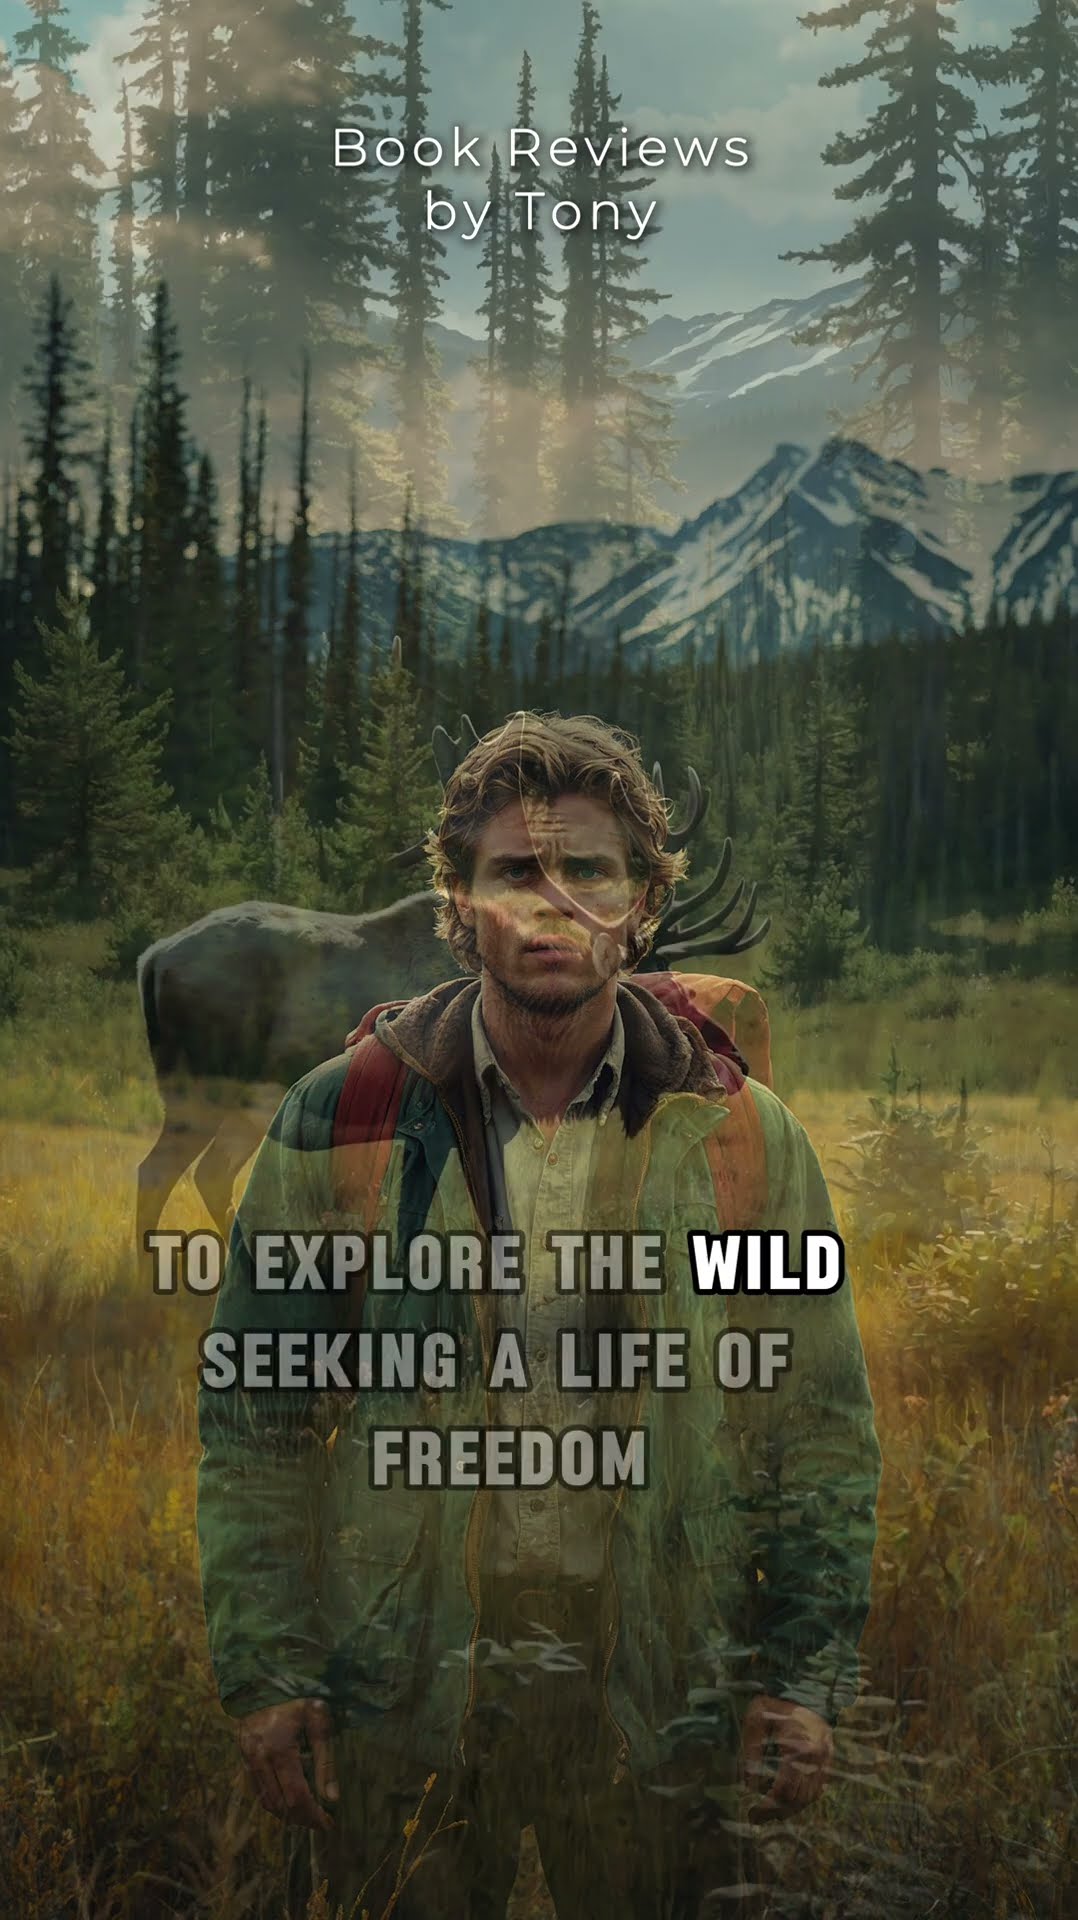 “Into the Wild” by Jon Krakauer Short Book Review